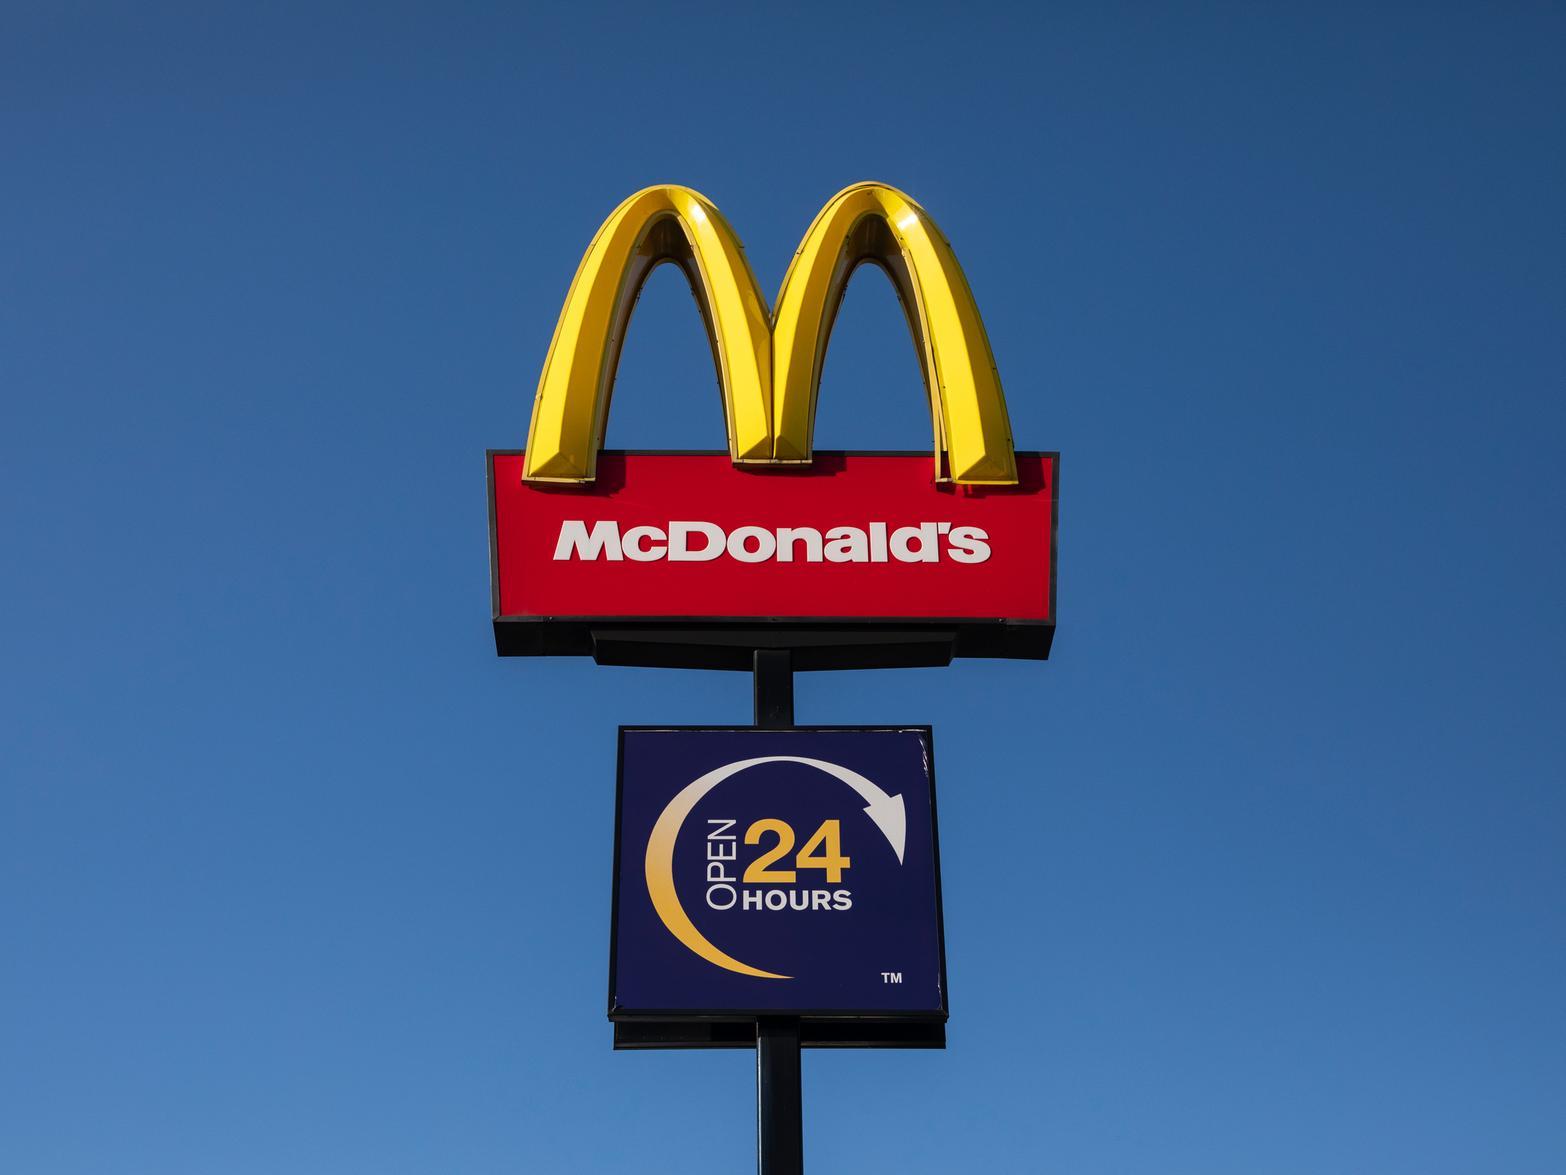 Of course, no wishful restaurant chain would be complete without McDonald's. Though the chain operate more than 1,200 branches across the UK, our readers are desperate to see more of the stores in the Five Towns.